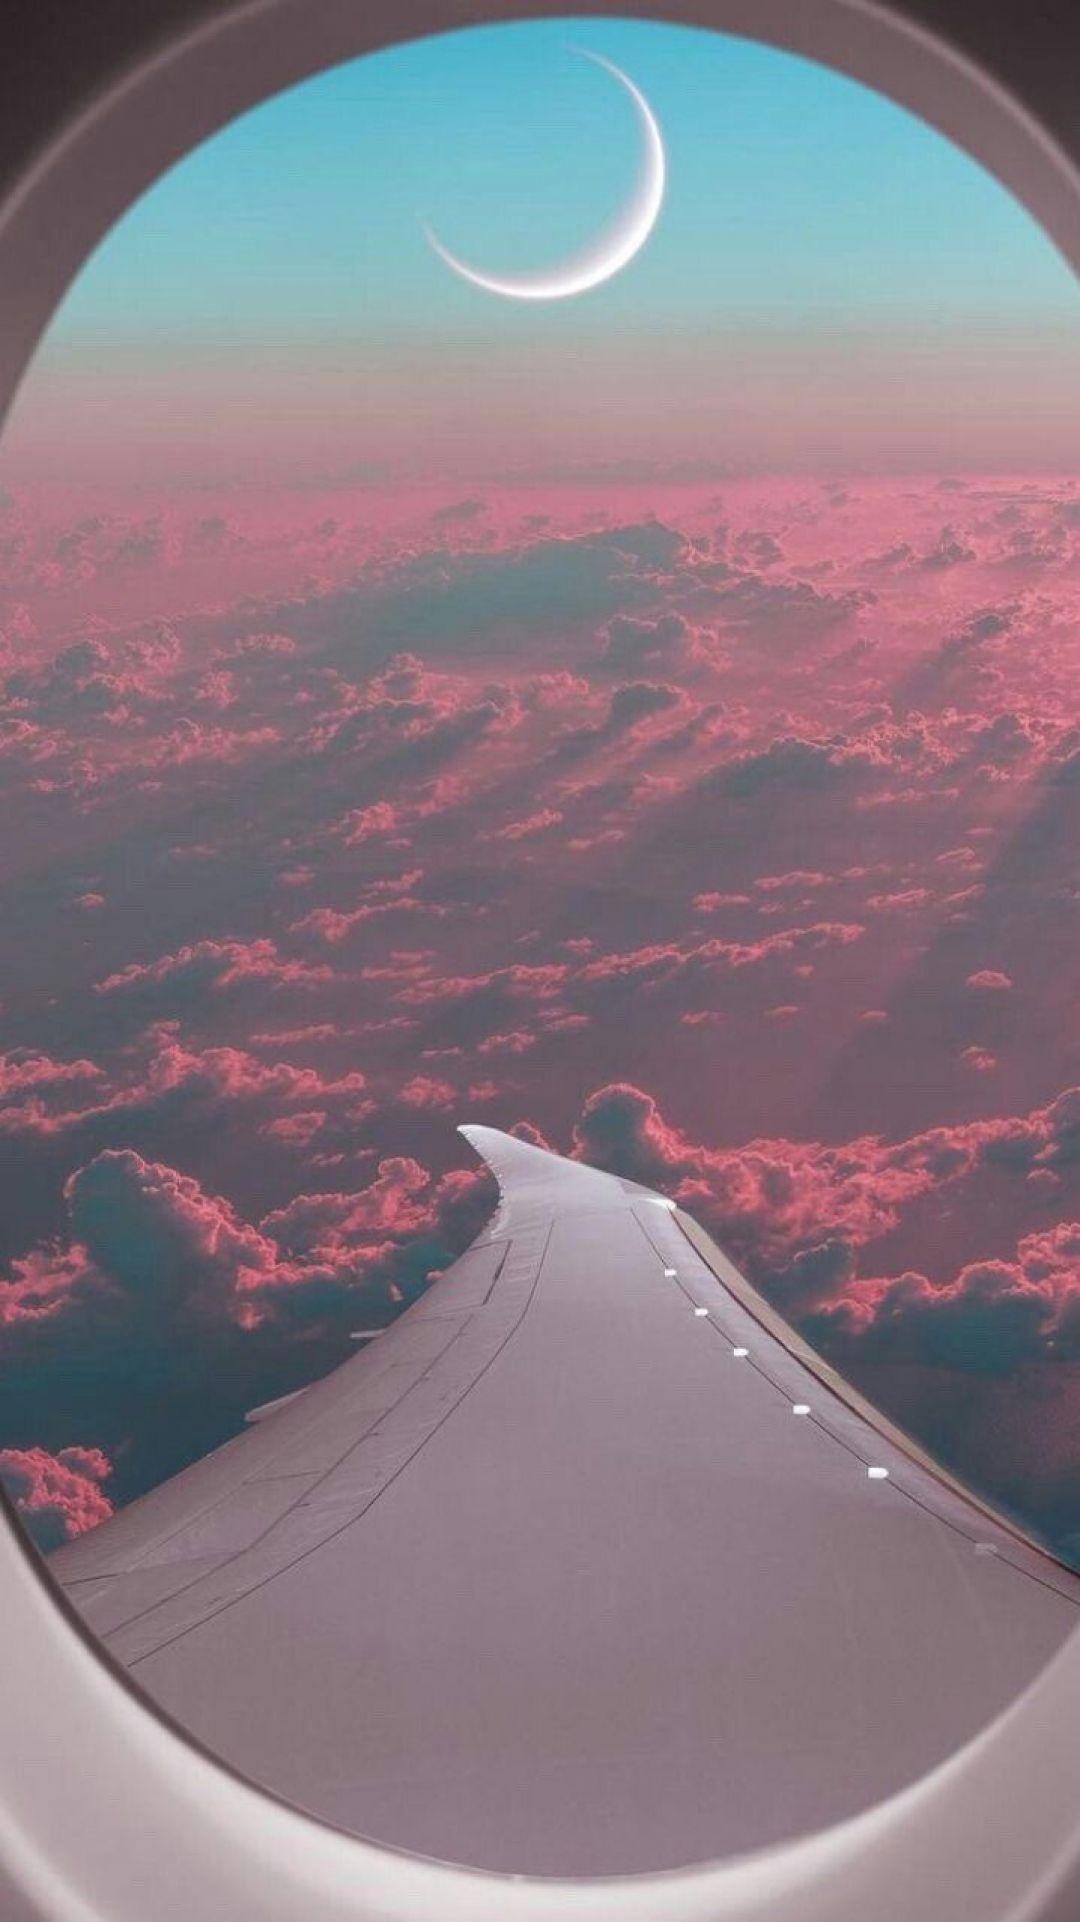 Aesthetic Airplane Wallpapers